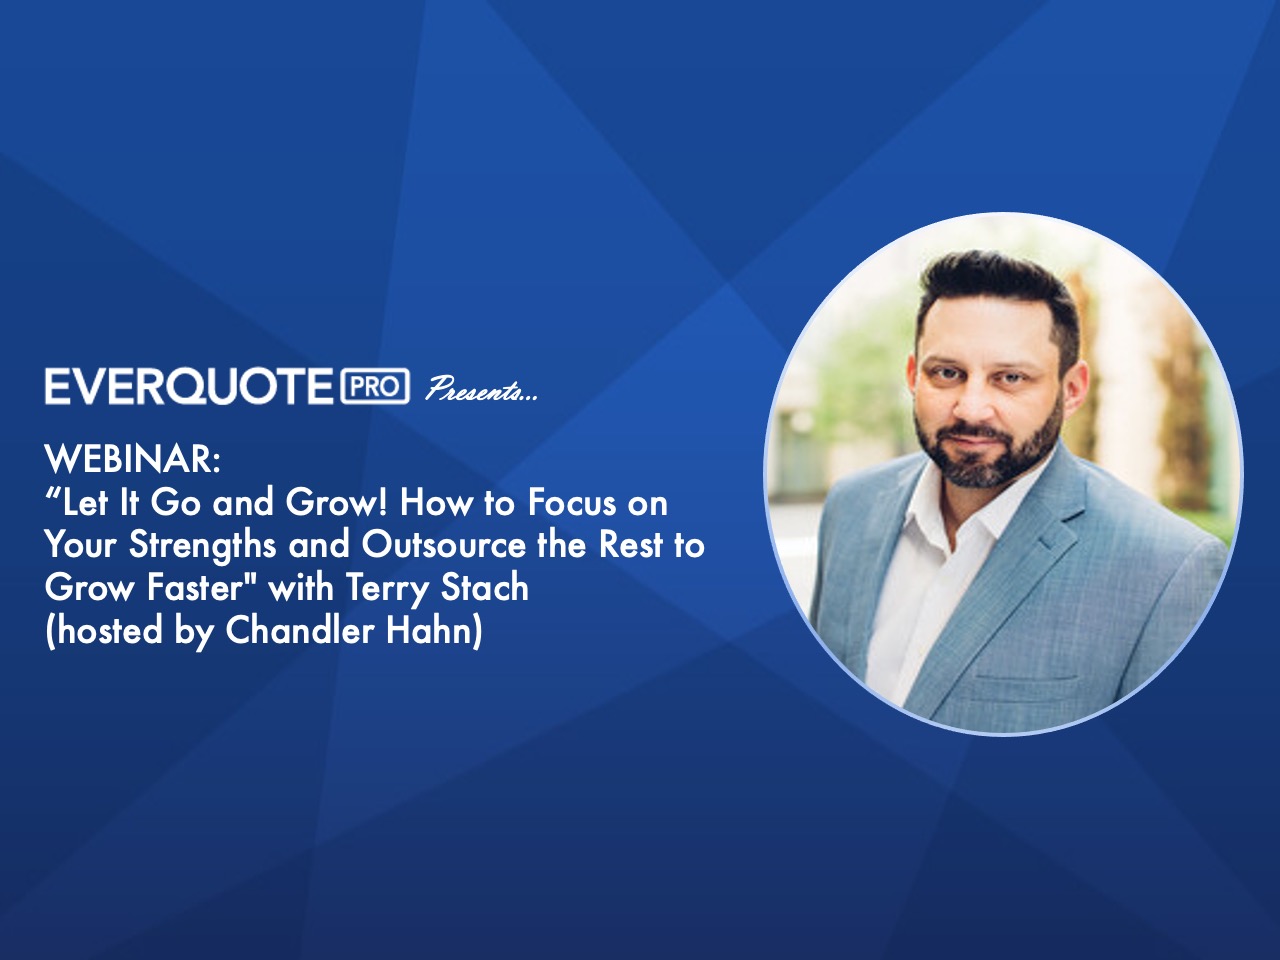 Let It Go and Grow! How to Focus on Your Strengths and Outsource the Rest to Grow Faster with Terry Stach